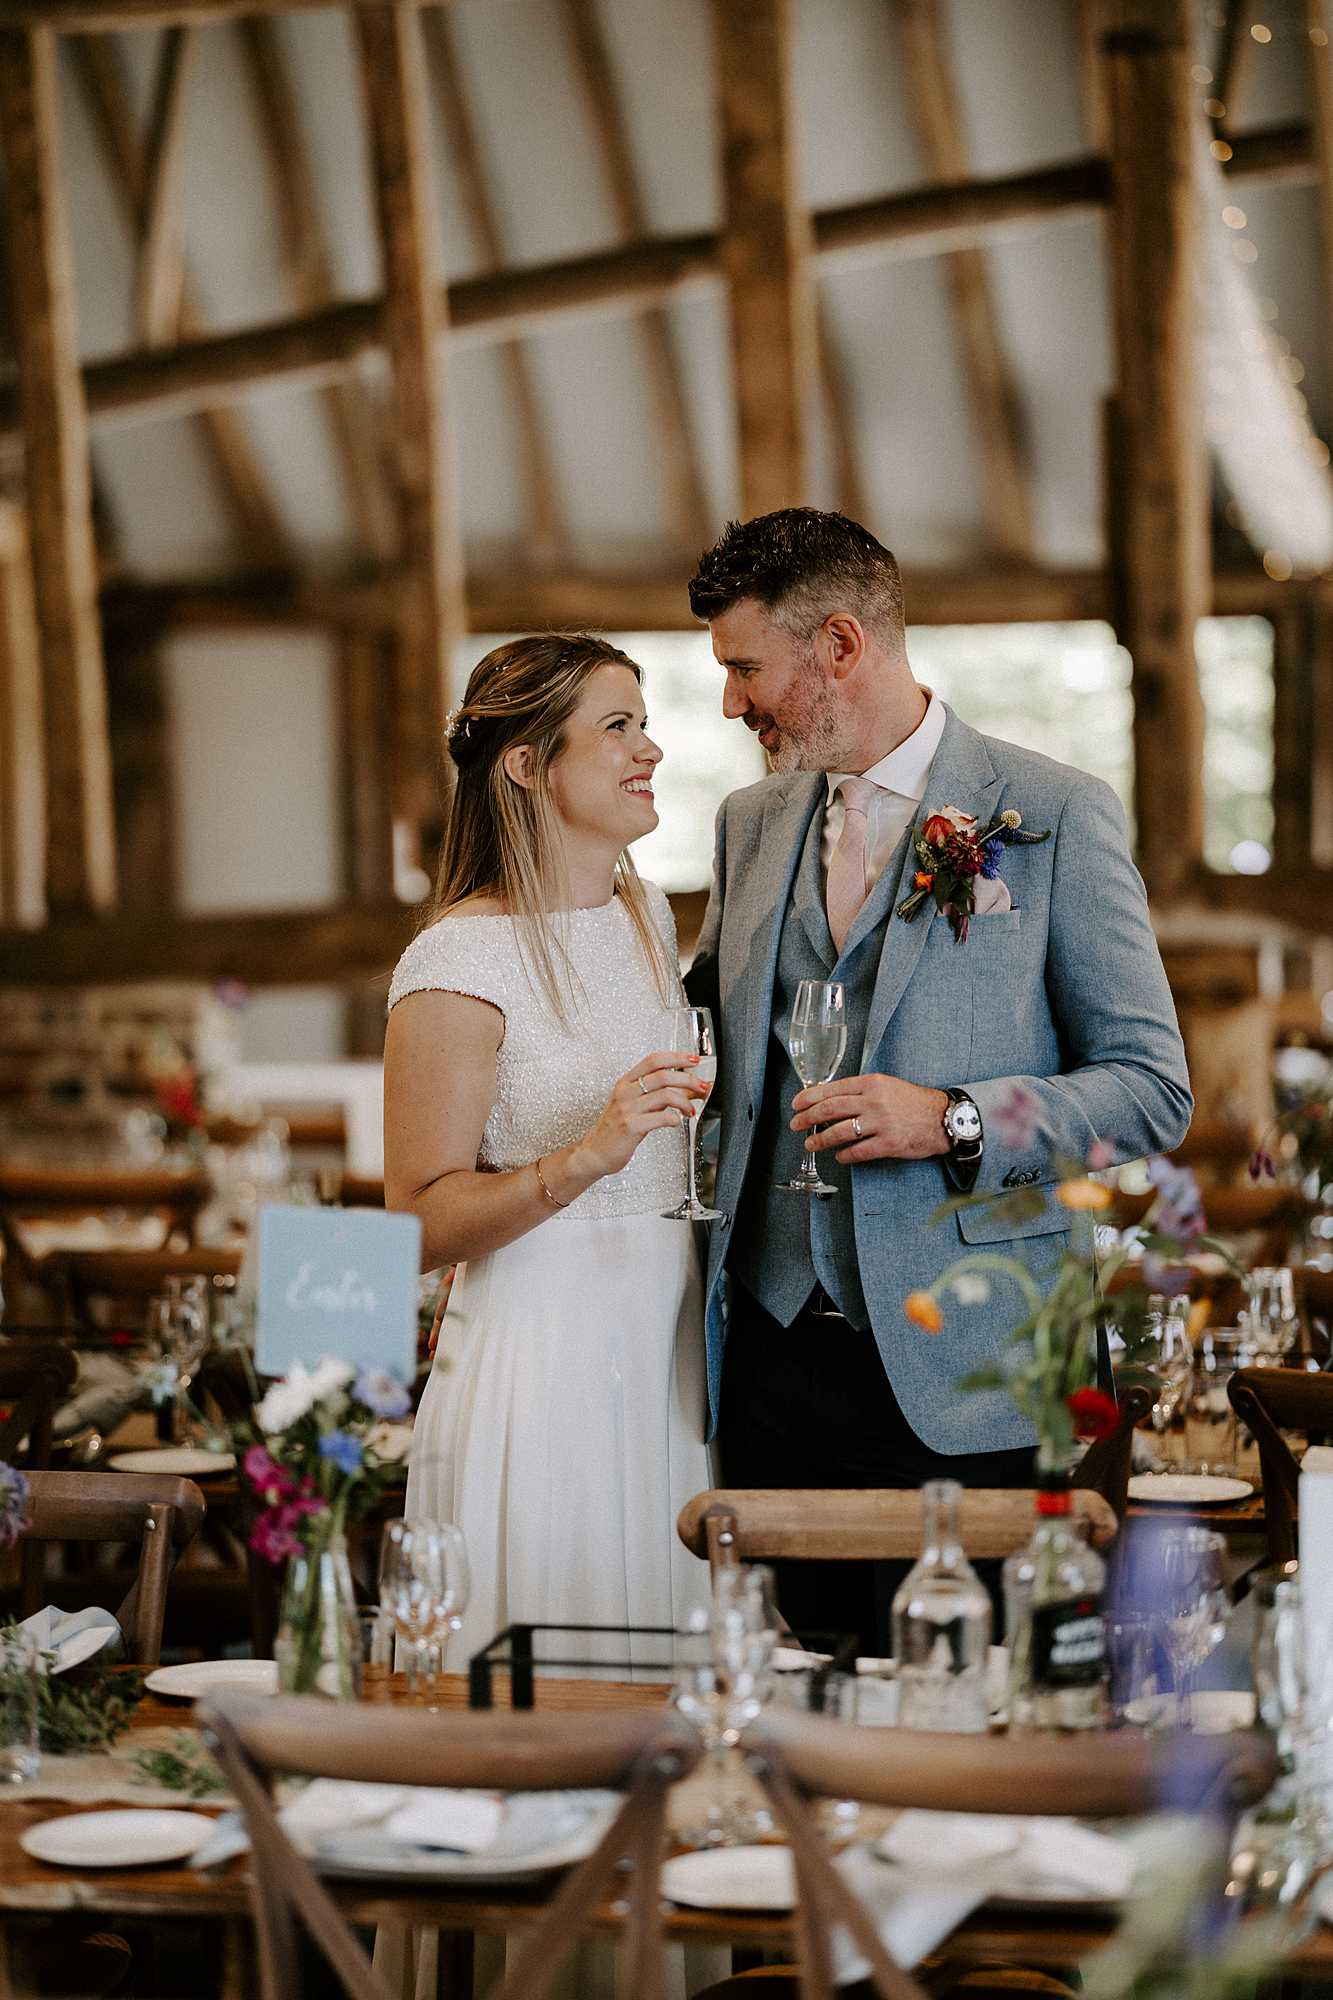 Wedding at The Oak Barn, Frame Farm, with Jo and James